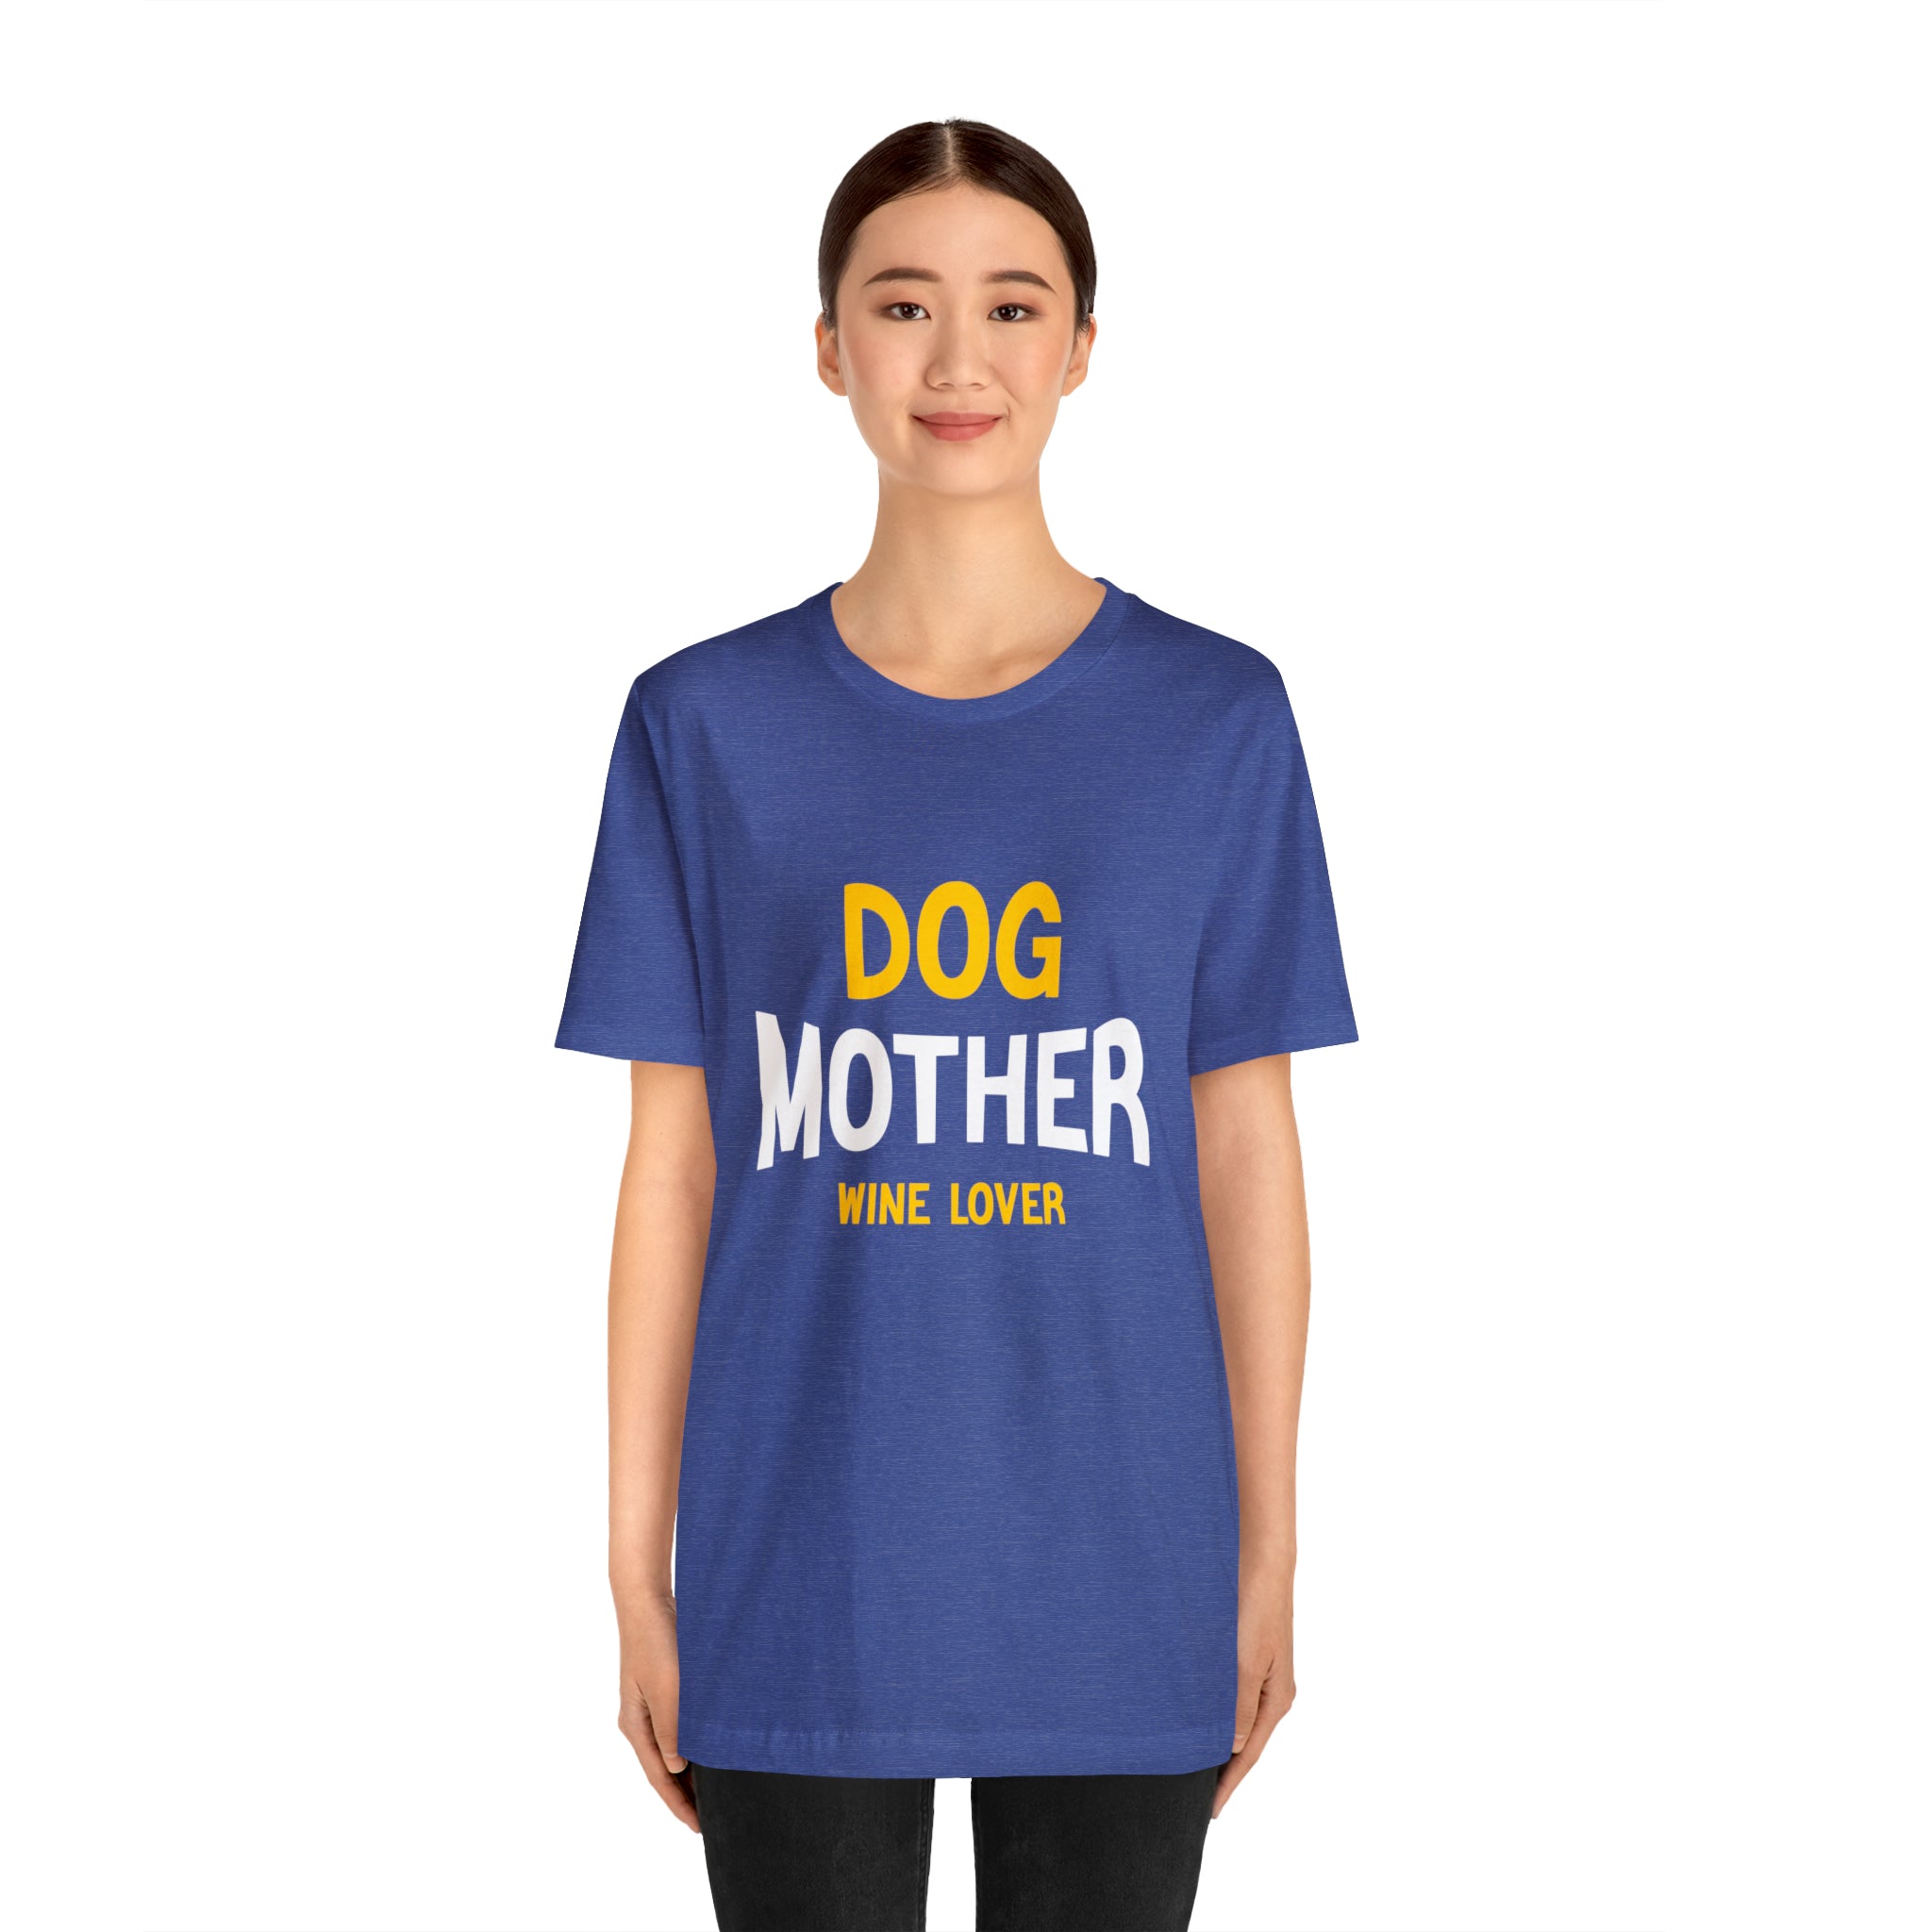 A woman wearing a blue Dog Mother Wine Lover T-Shirt.